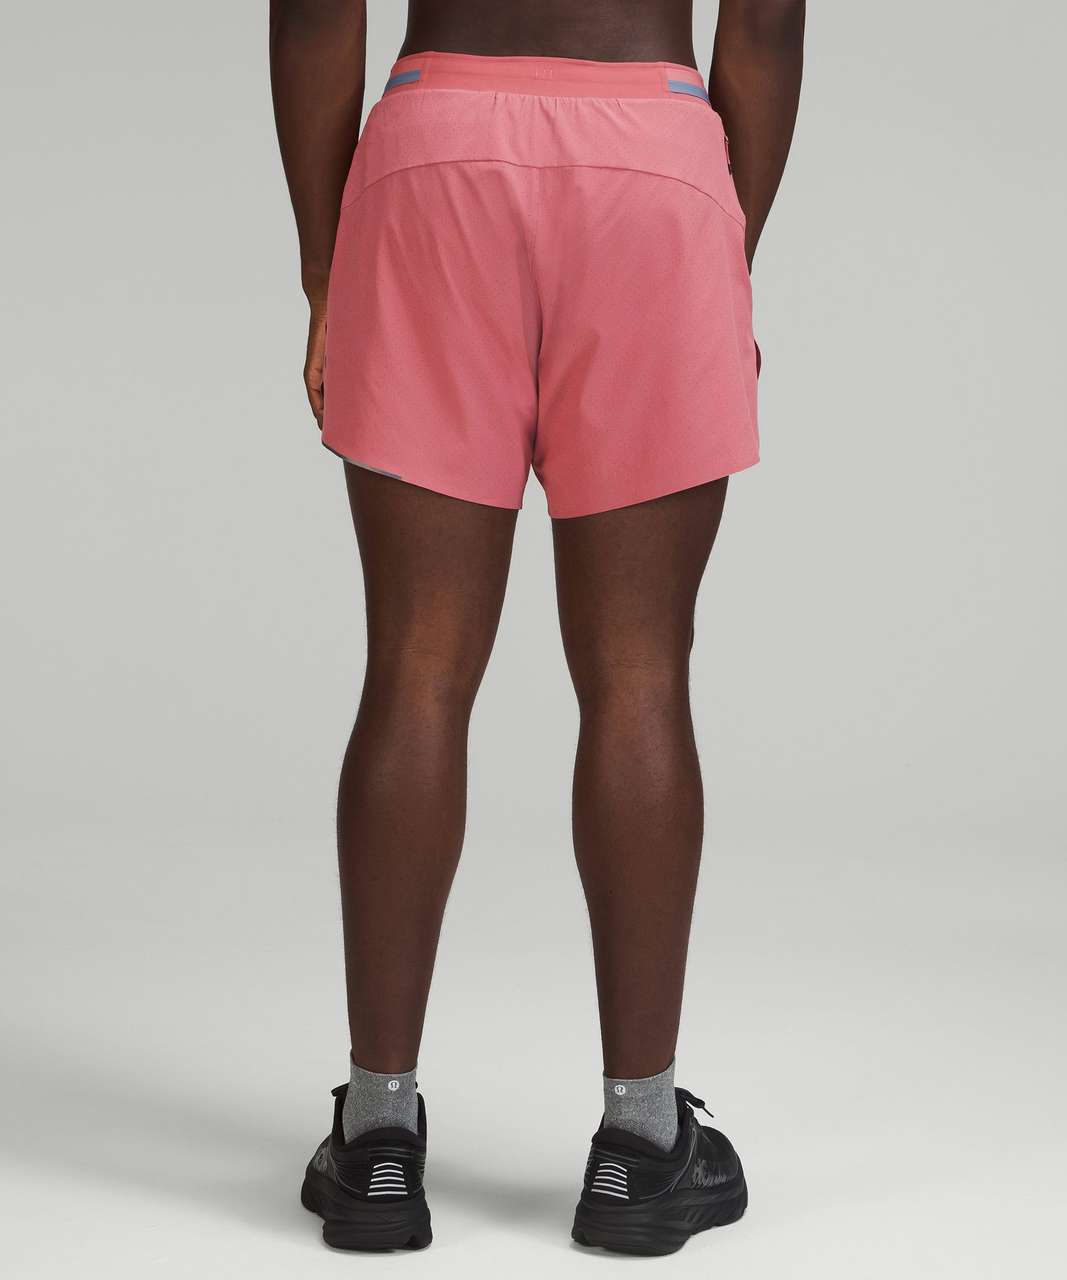 Lululemon Track That 2-in-1 High-rise Shorts 6 - Brier Rose/water